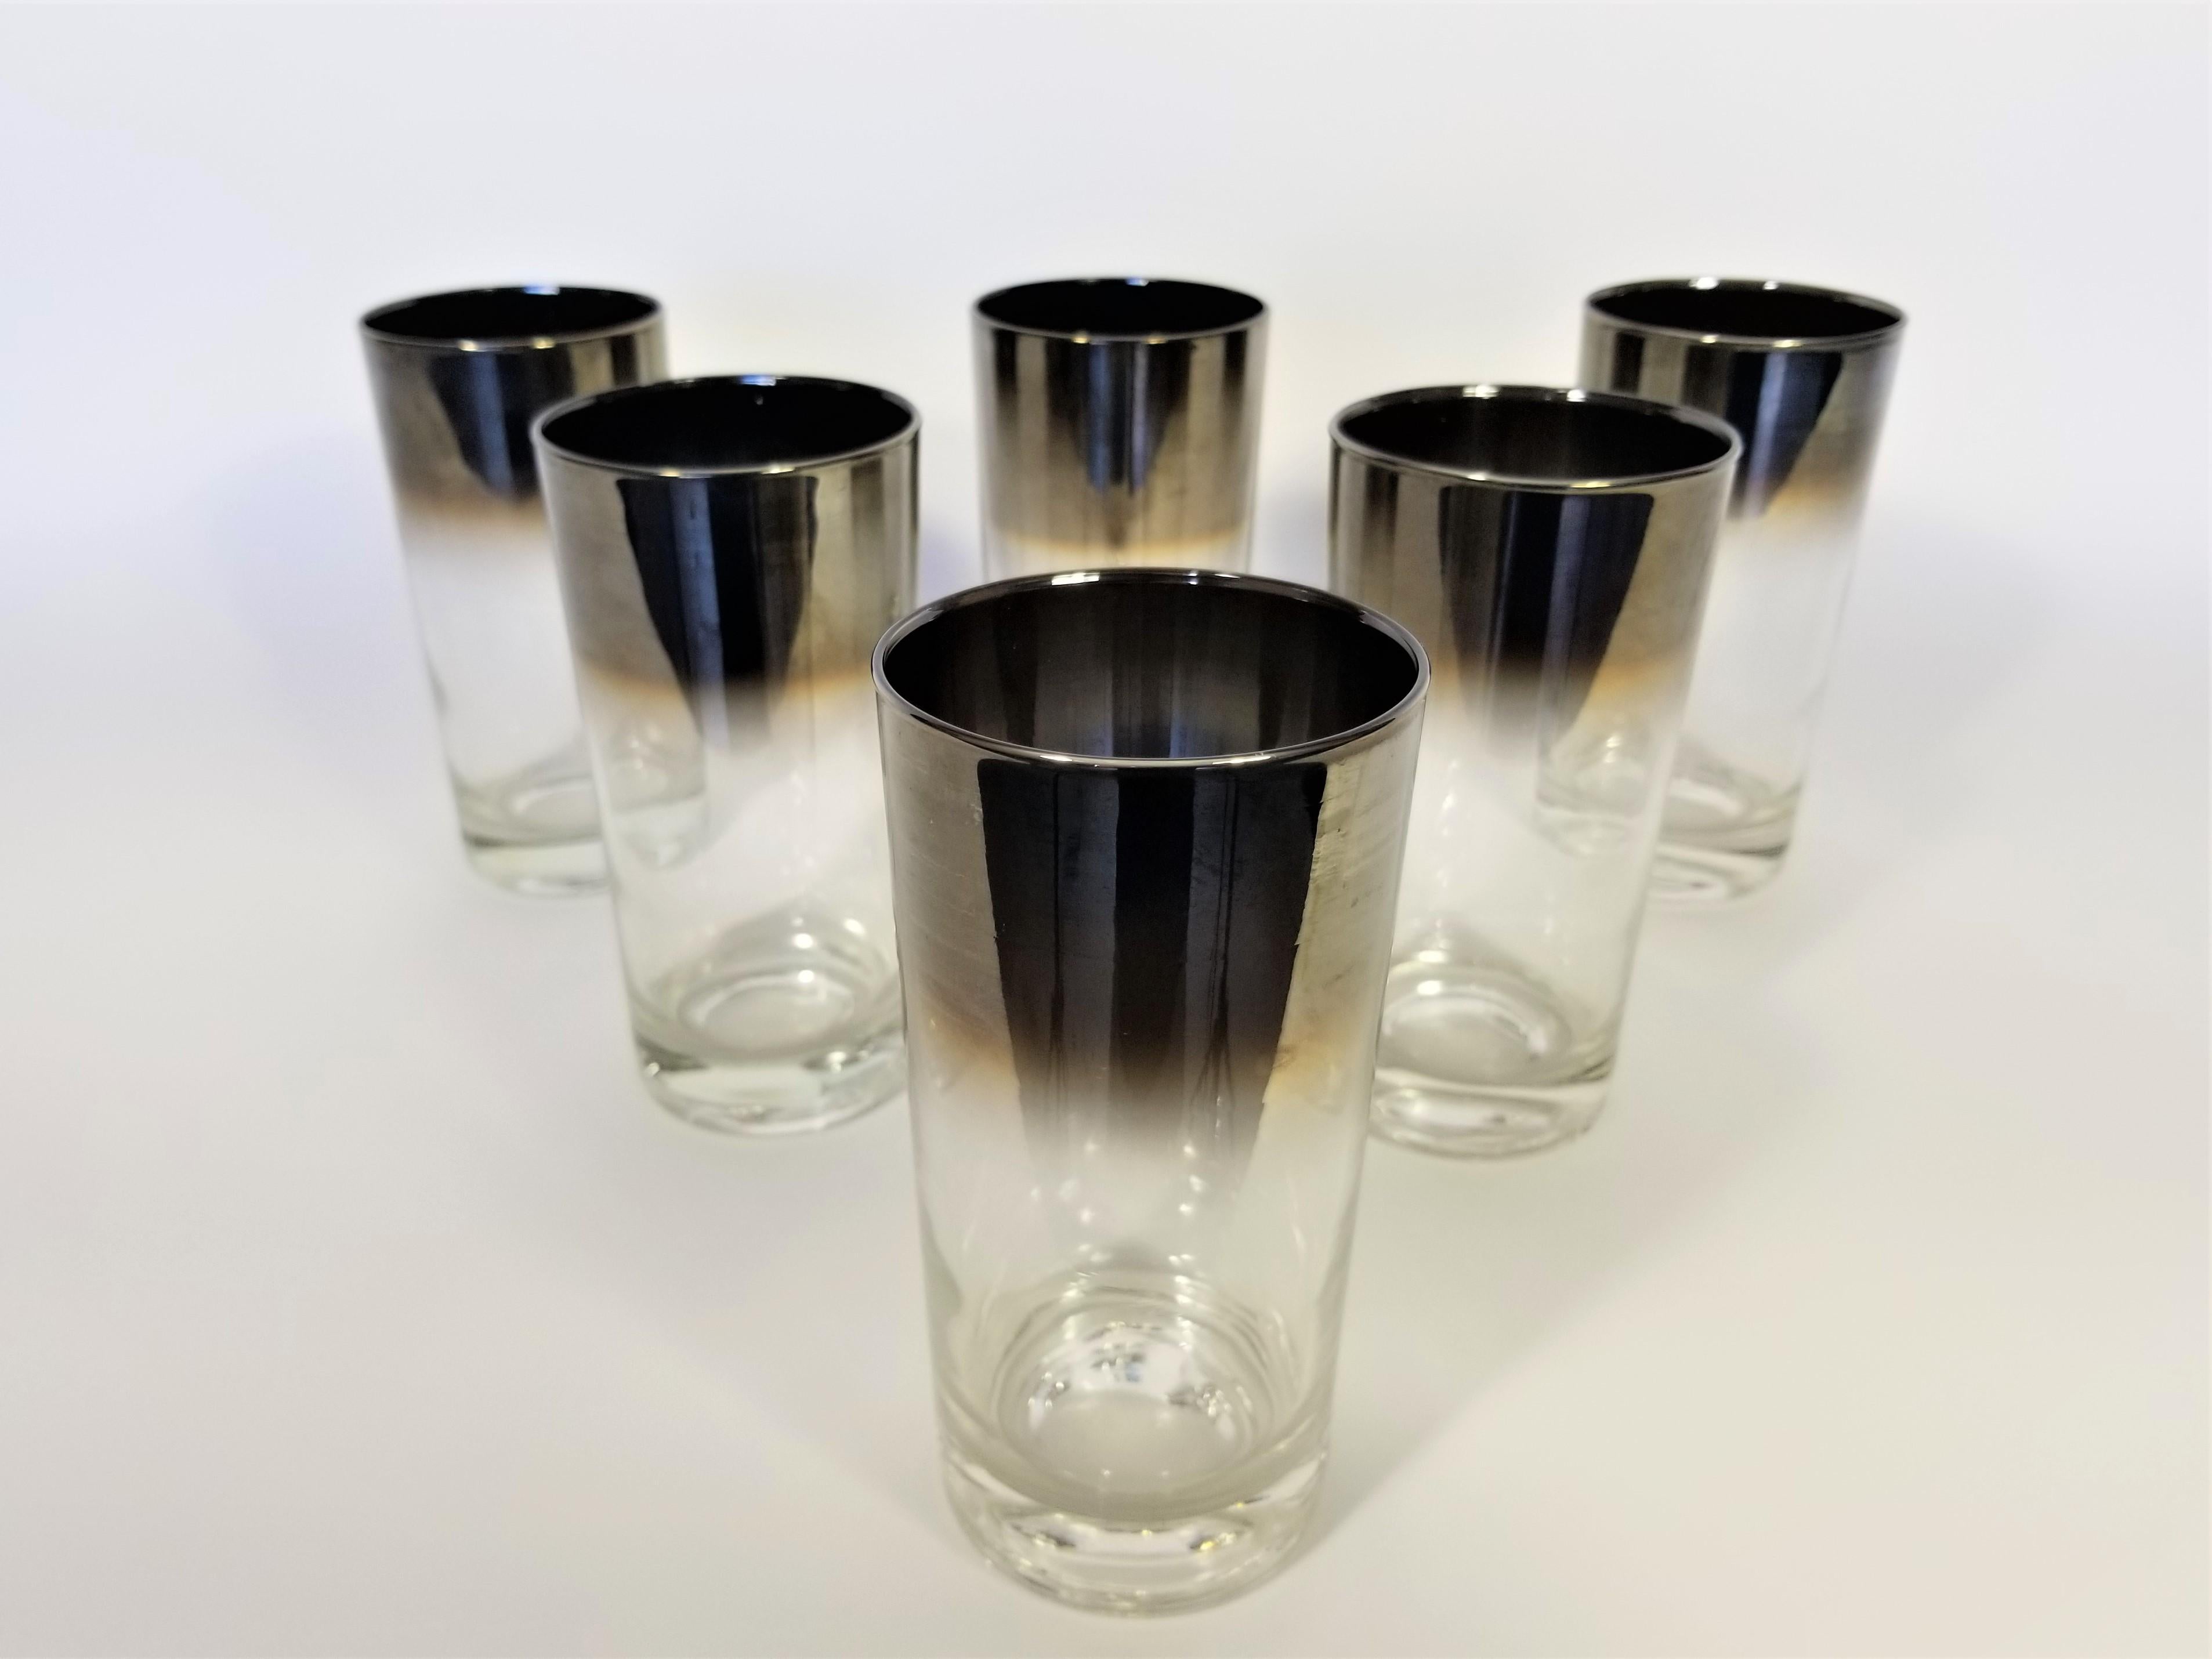 Midcentury set of 6 Dorothy Thorpe silver fade glasses with chrome holder. Perfect addition to any bar. Excellent condition. 

Measurements:
Height of glasses: 5.63 inches
Diameter of glasses: 2.75 inches

Height of holder 7.75 inches
Width